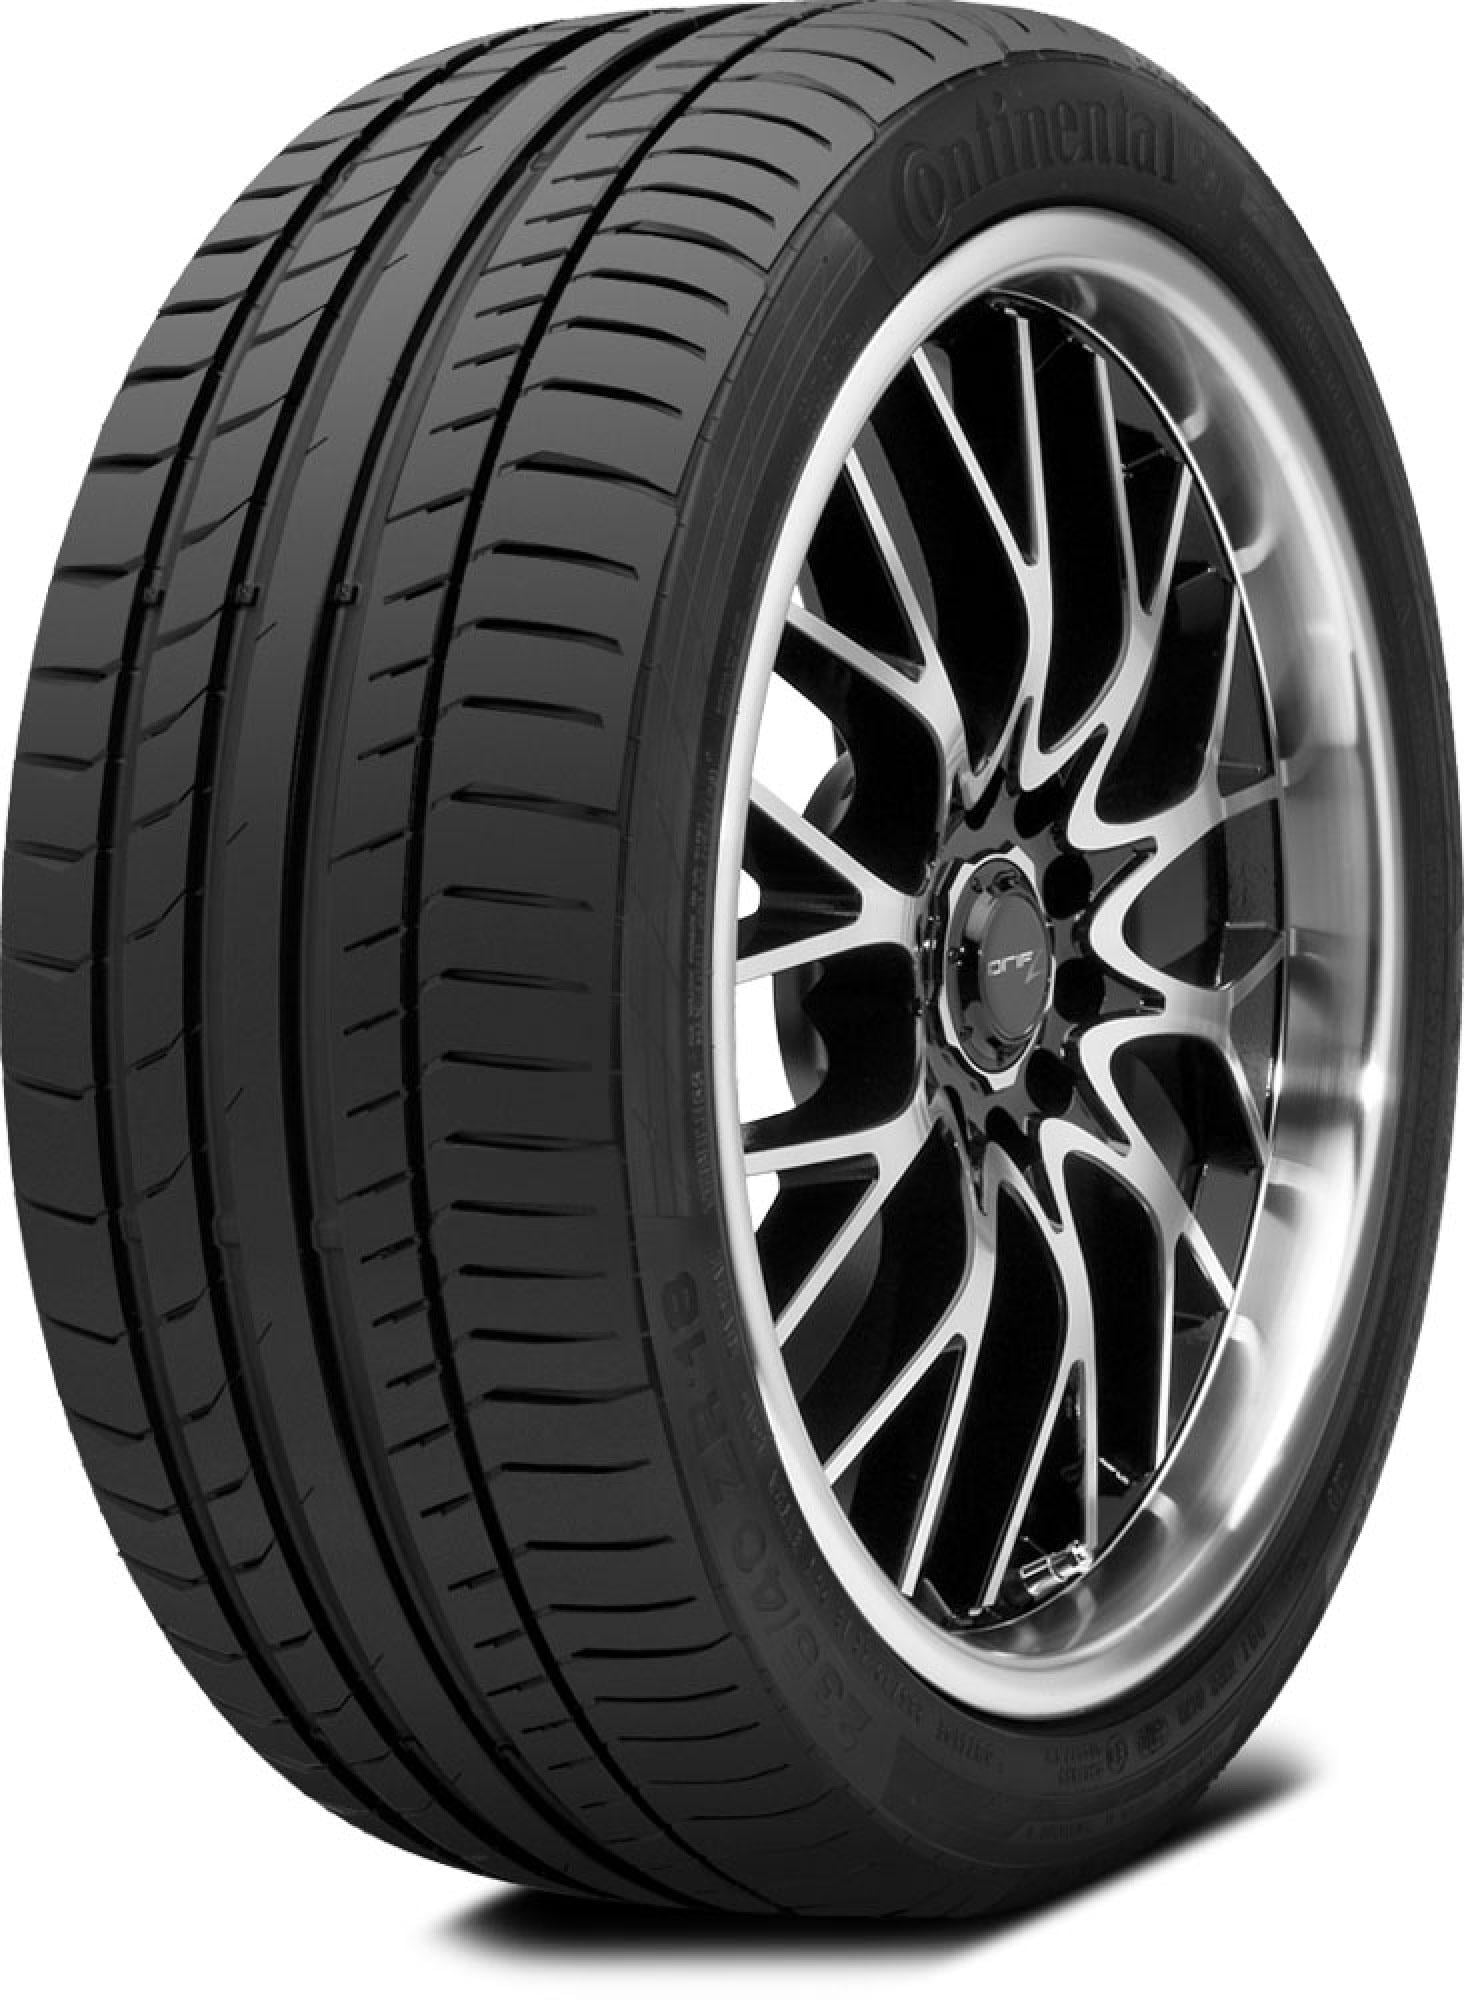 Continental ContiSportContact 5 Summer 225/40R18 92Y XL Passenger Tire